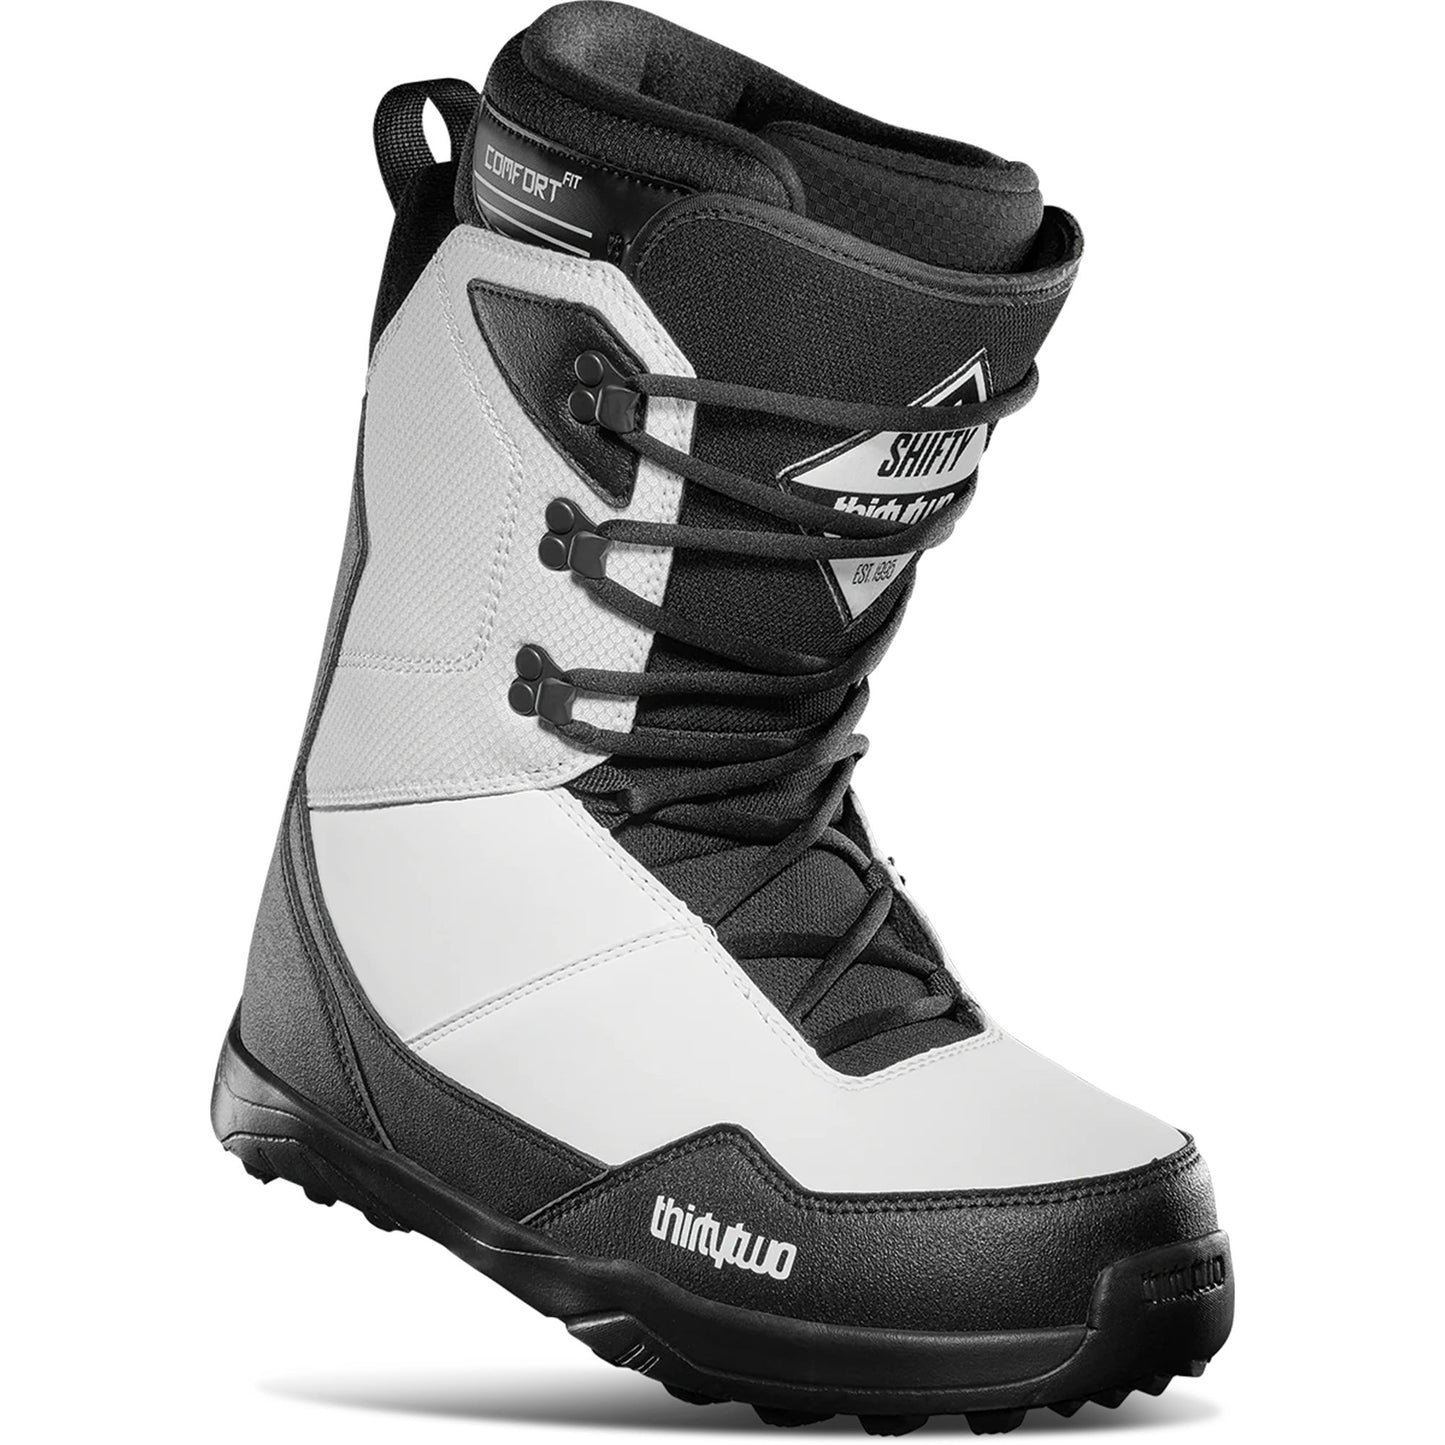 ThirtyTwo Shifty Snowboard Boots Black/White Snowboard Boots